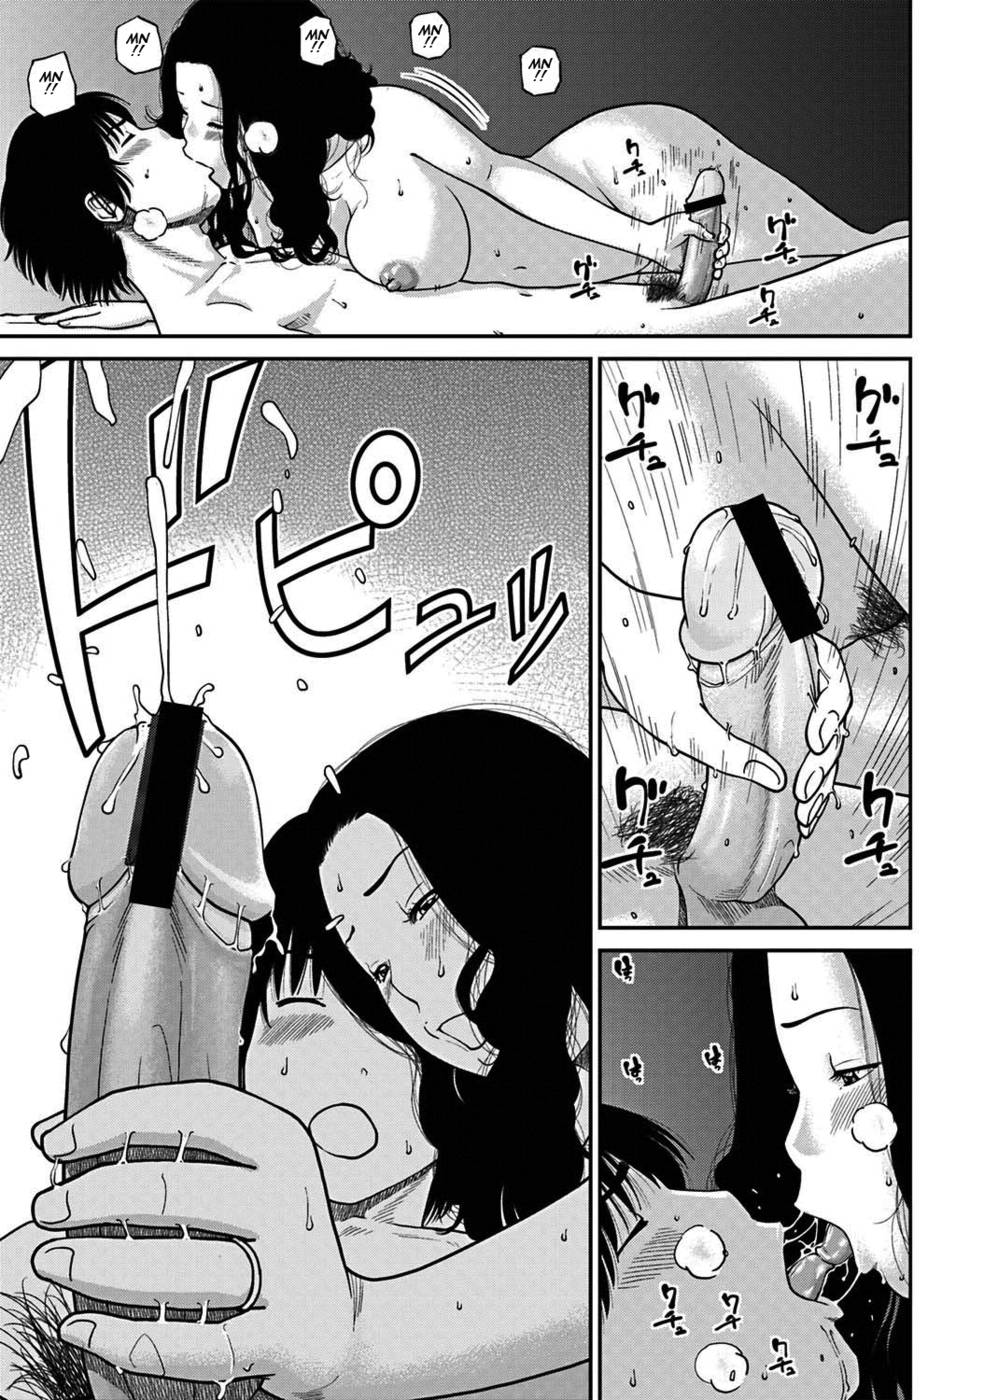 Hentai Manga Comic-33 Year Old Unsatisfied Wife-Chapter 2-Spouse Swapping-First Night-19